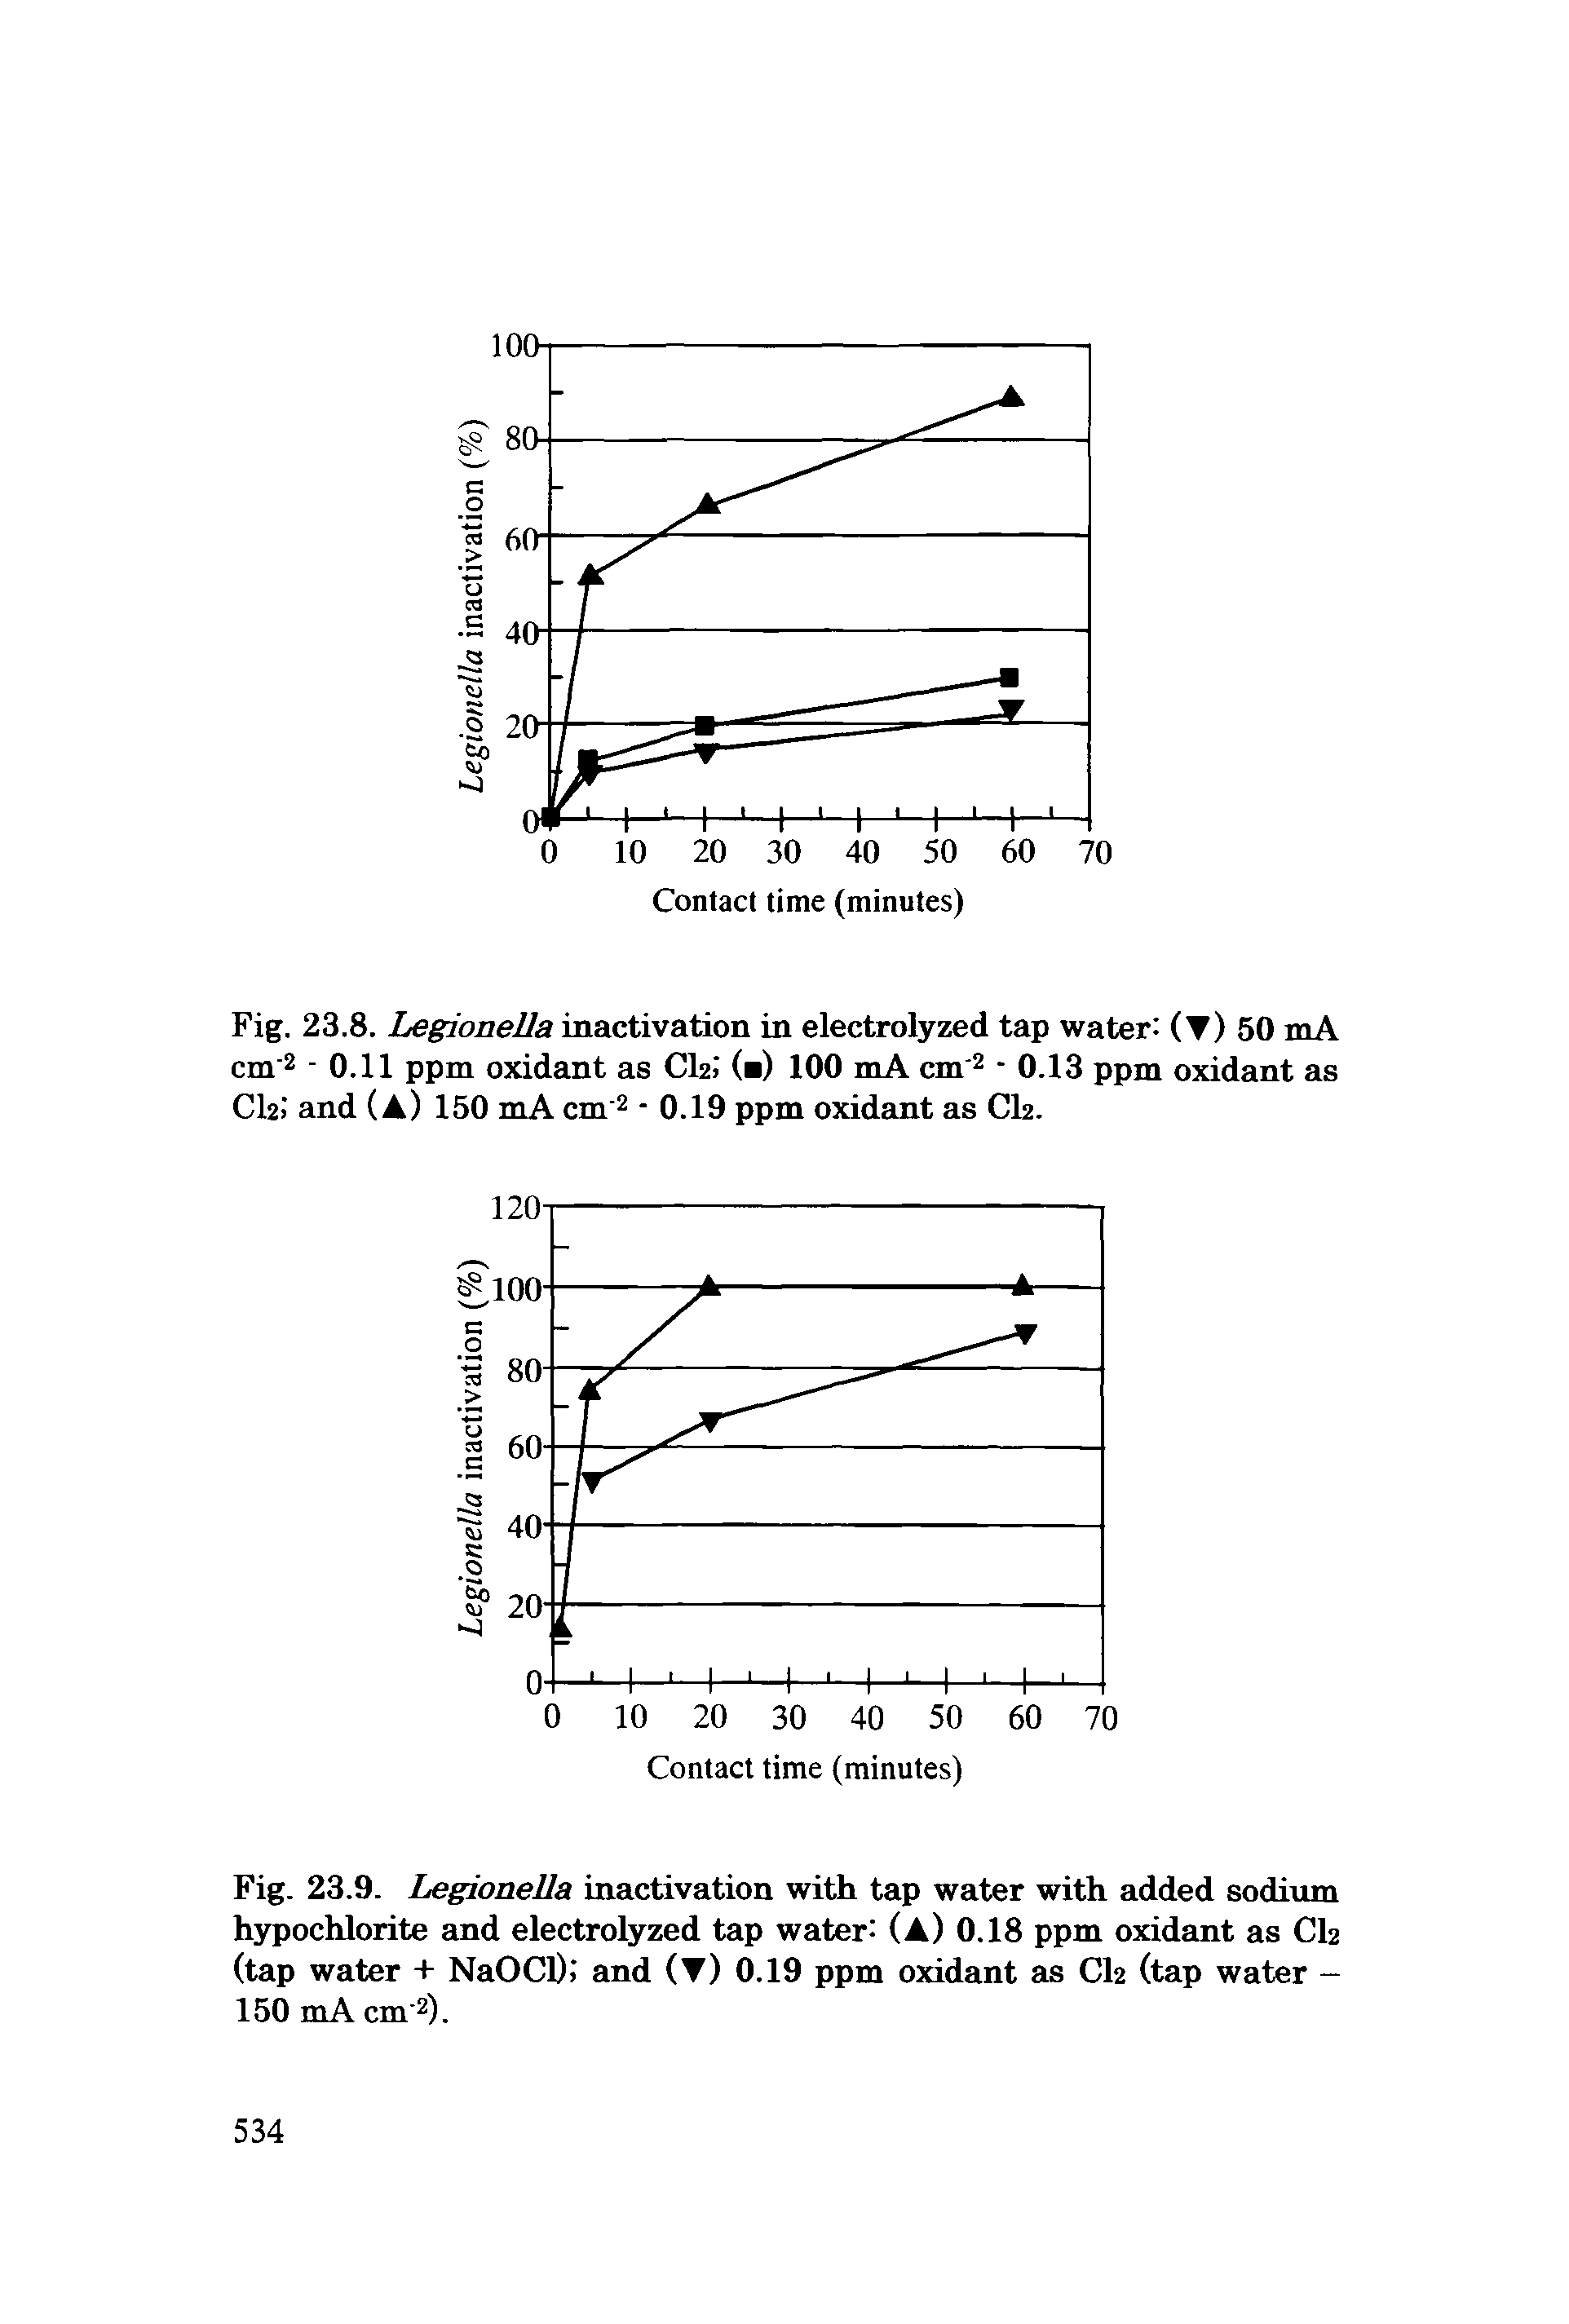 Fig. 23.9. Legionella inactivation with tap water with added sodium hypochlorite and electrolyzed tap water (A) 0.18 ppm oxidant as CI2 (tap water + NaOCl). and ( ) 0.19 ppm oxidant as CI2 (tap water -150 mA cm 2).